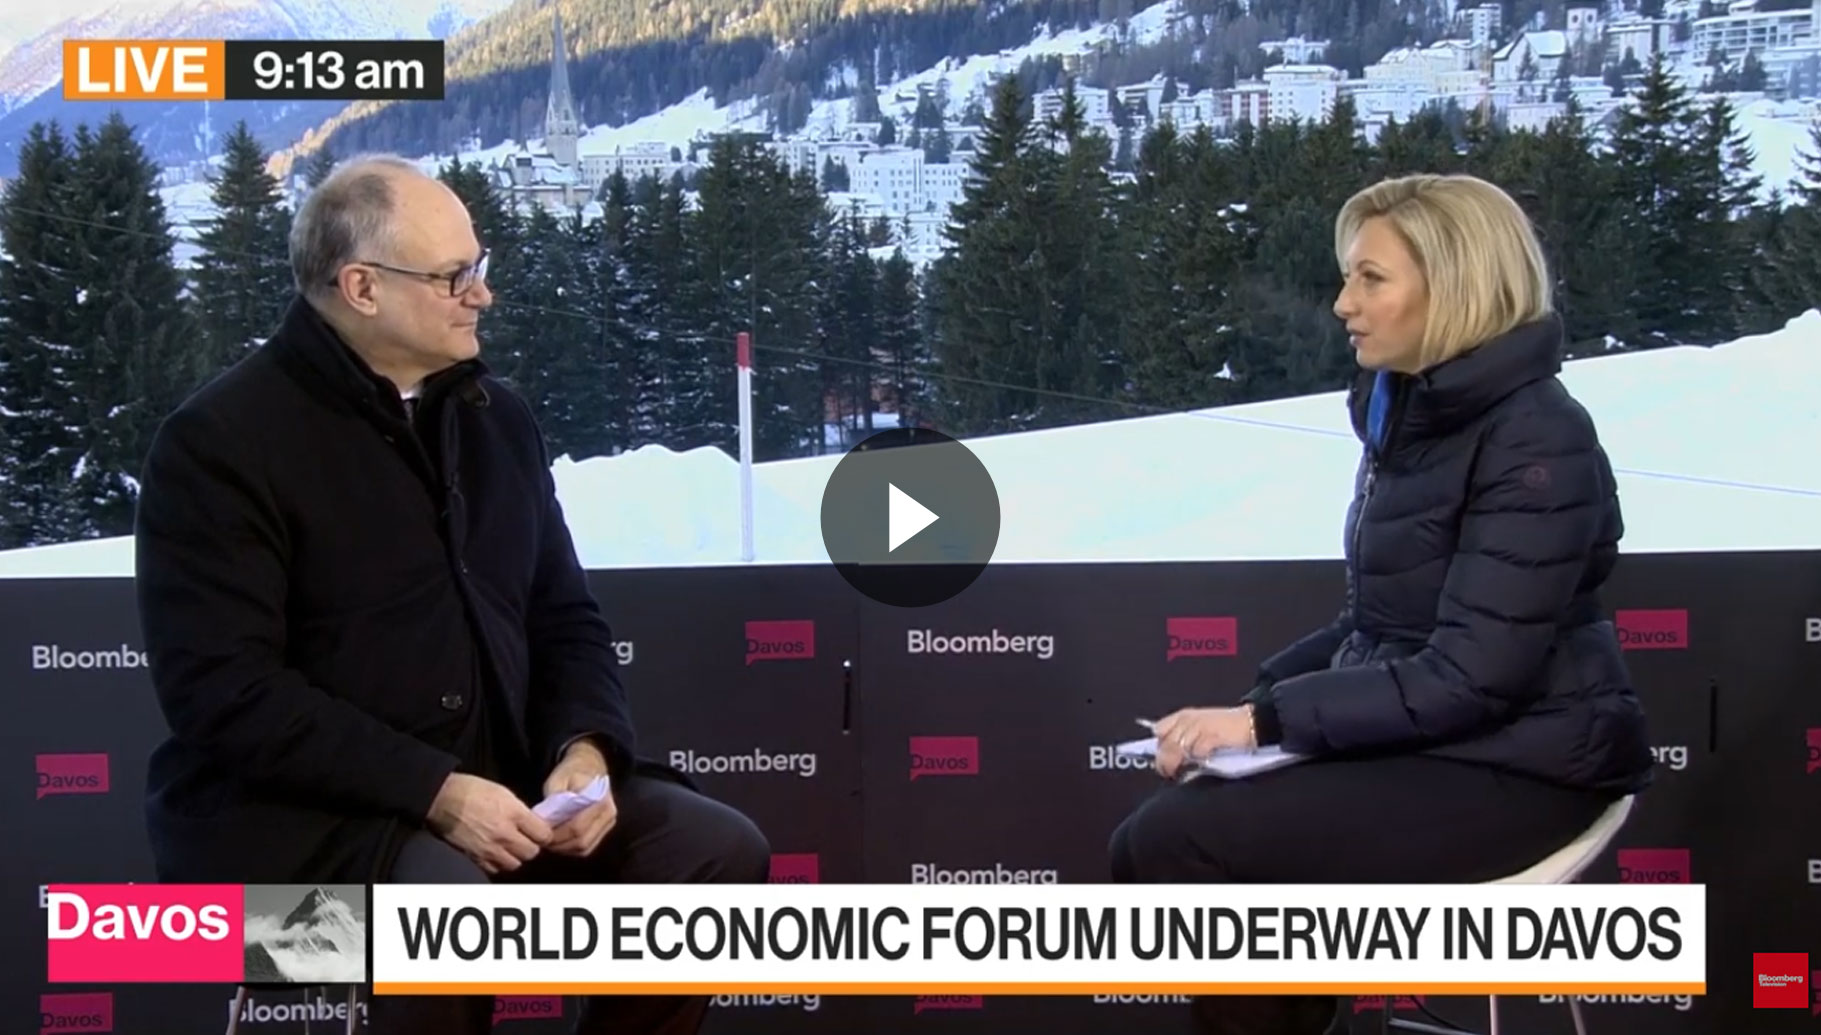 Roberto Gualtieri’s interview with Bloomberg TV on the sidelines of the World Economic Forum in Davos.